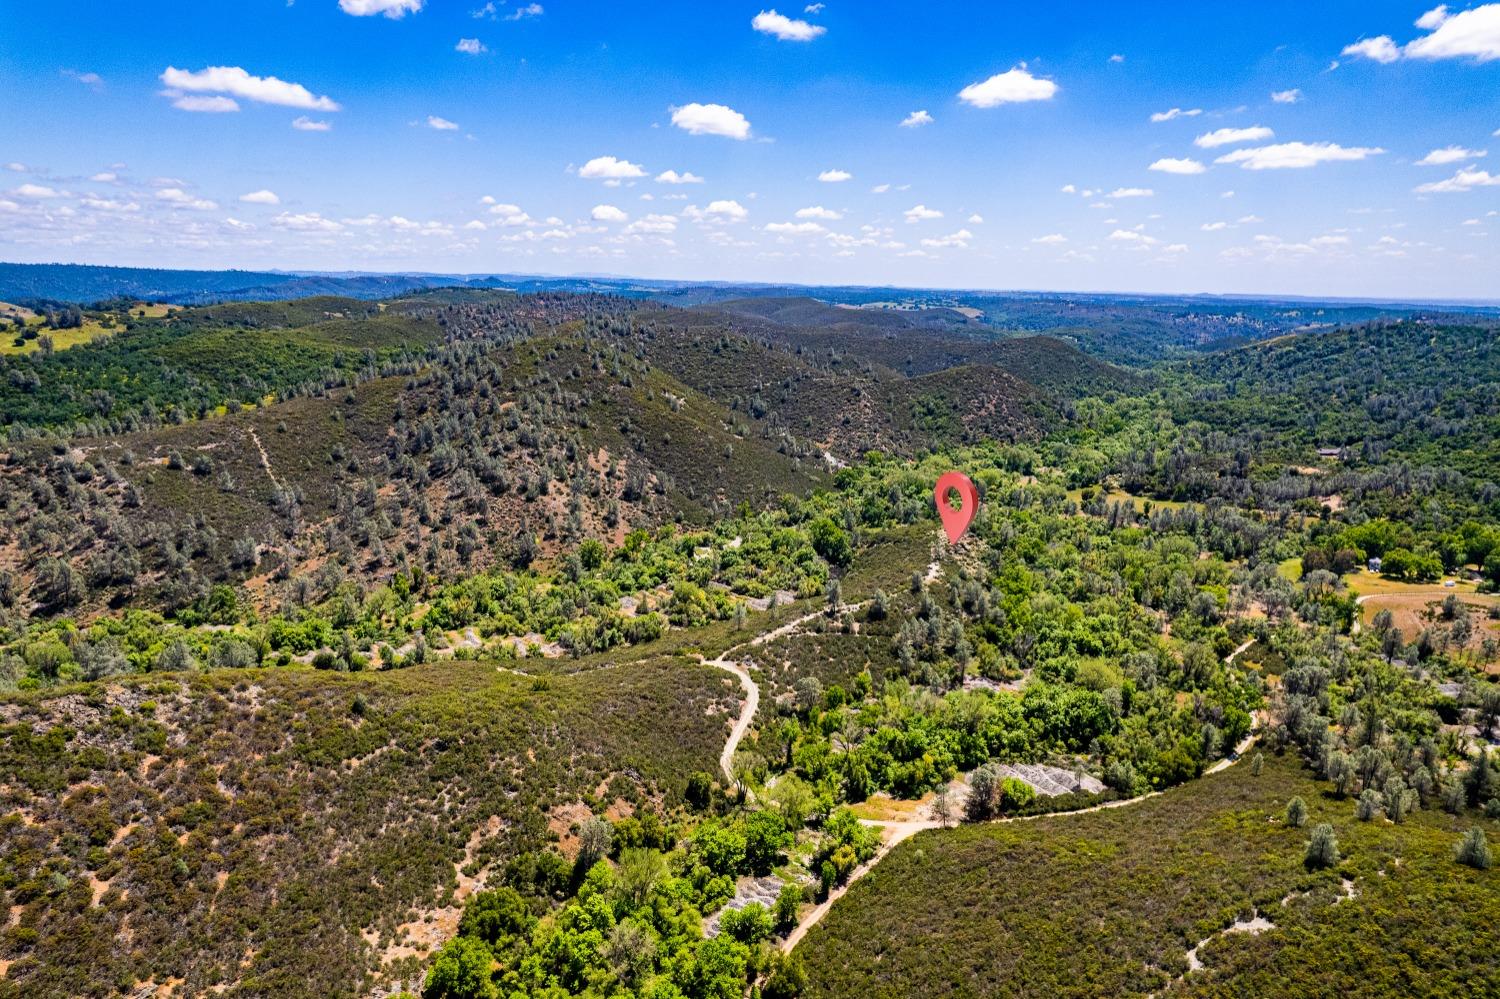 Amazing opportunity to own a large parcel in one of the last frontiers in the area.  This 40 acre estate property offers 360 degree views of some of the most beautiful undeveloped foothills you will ever see.  A section of Big Canyon Creek runs through the property!  See Aerial Viewing media attached to listing.